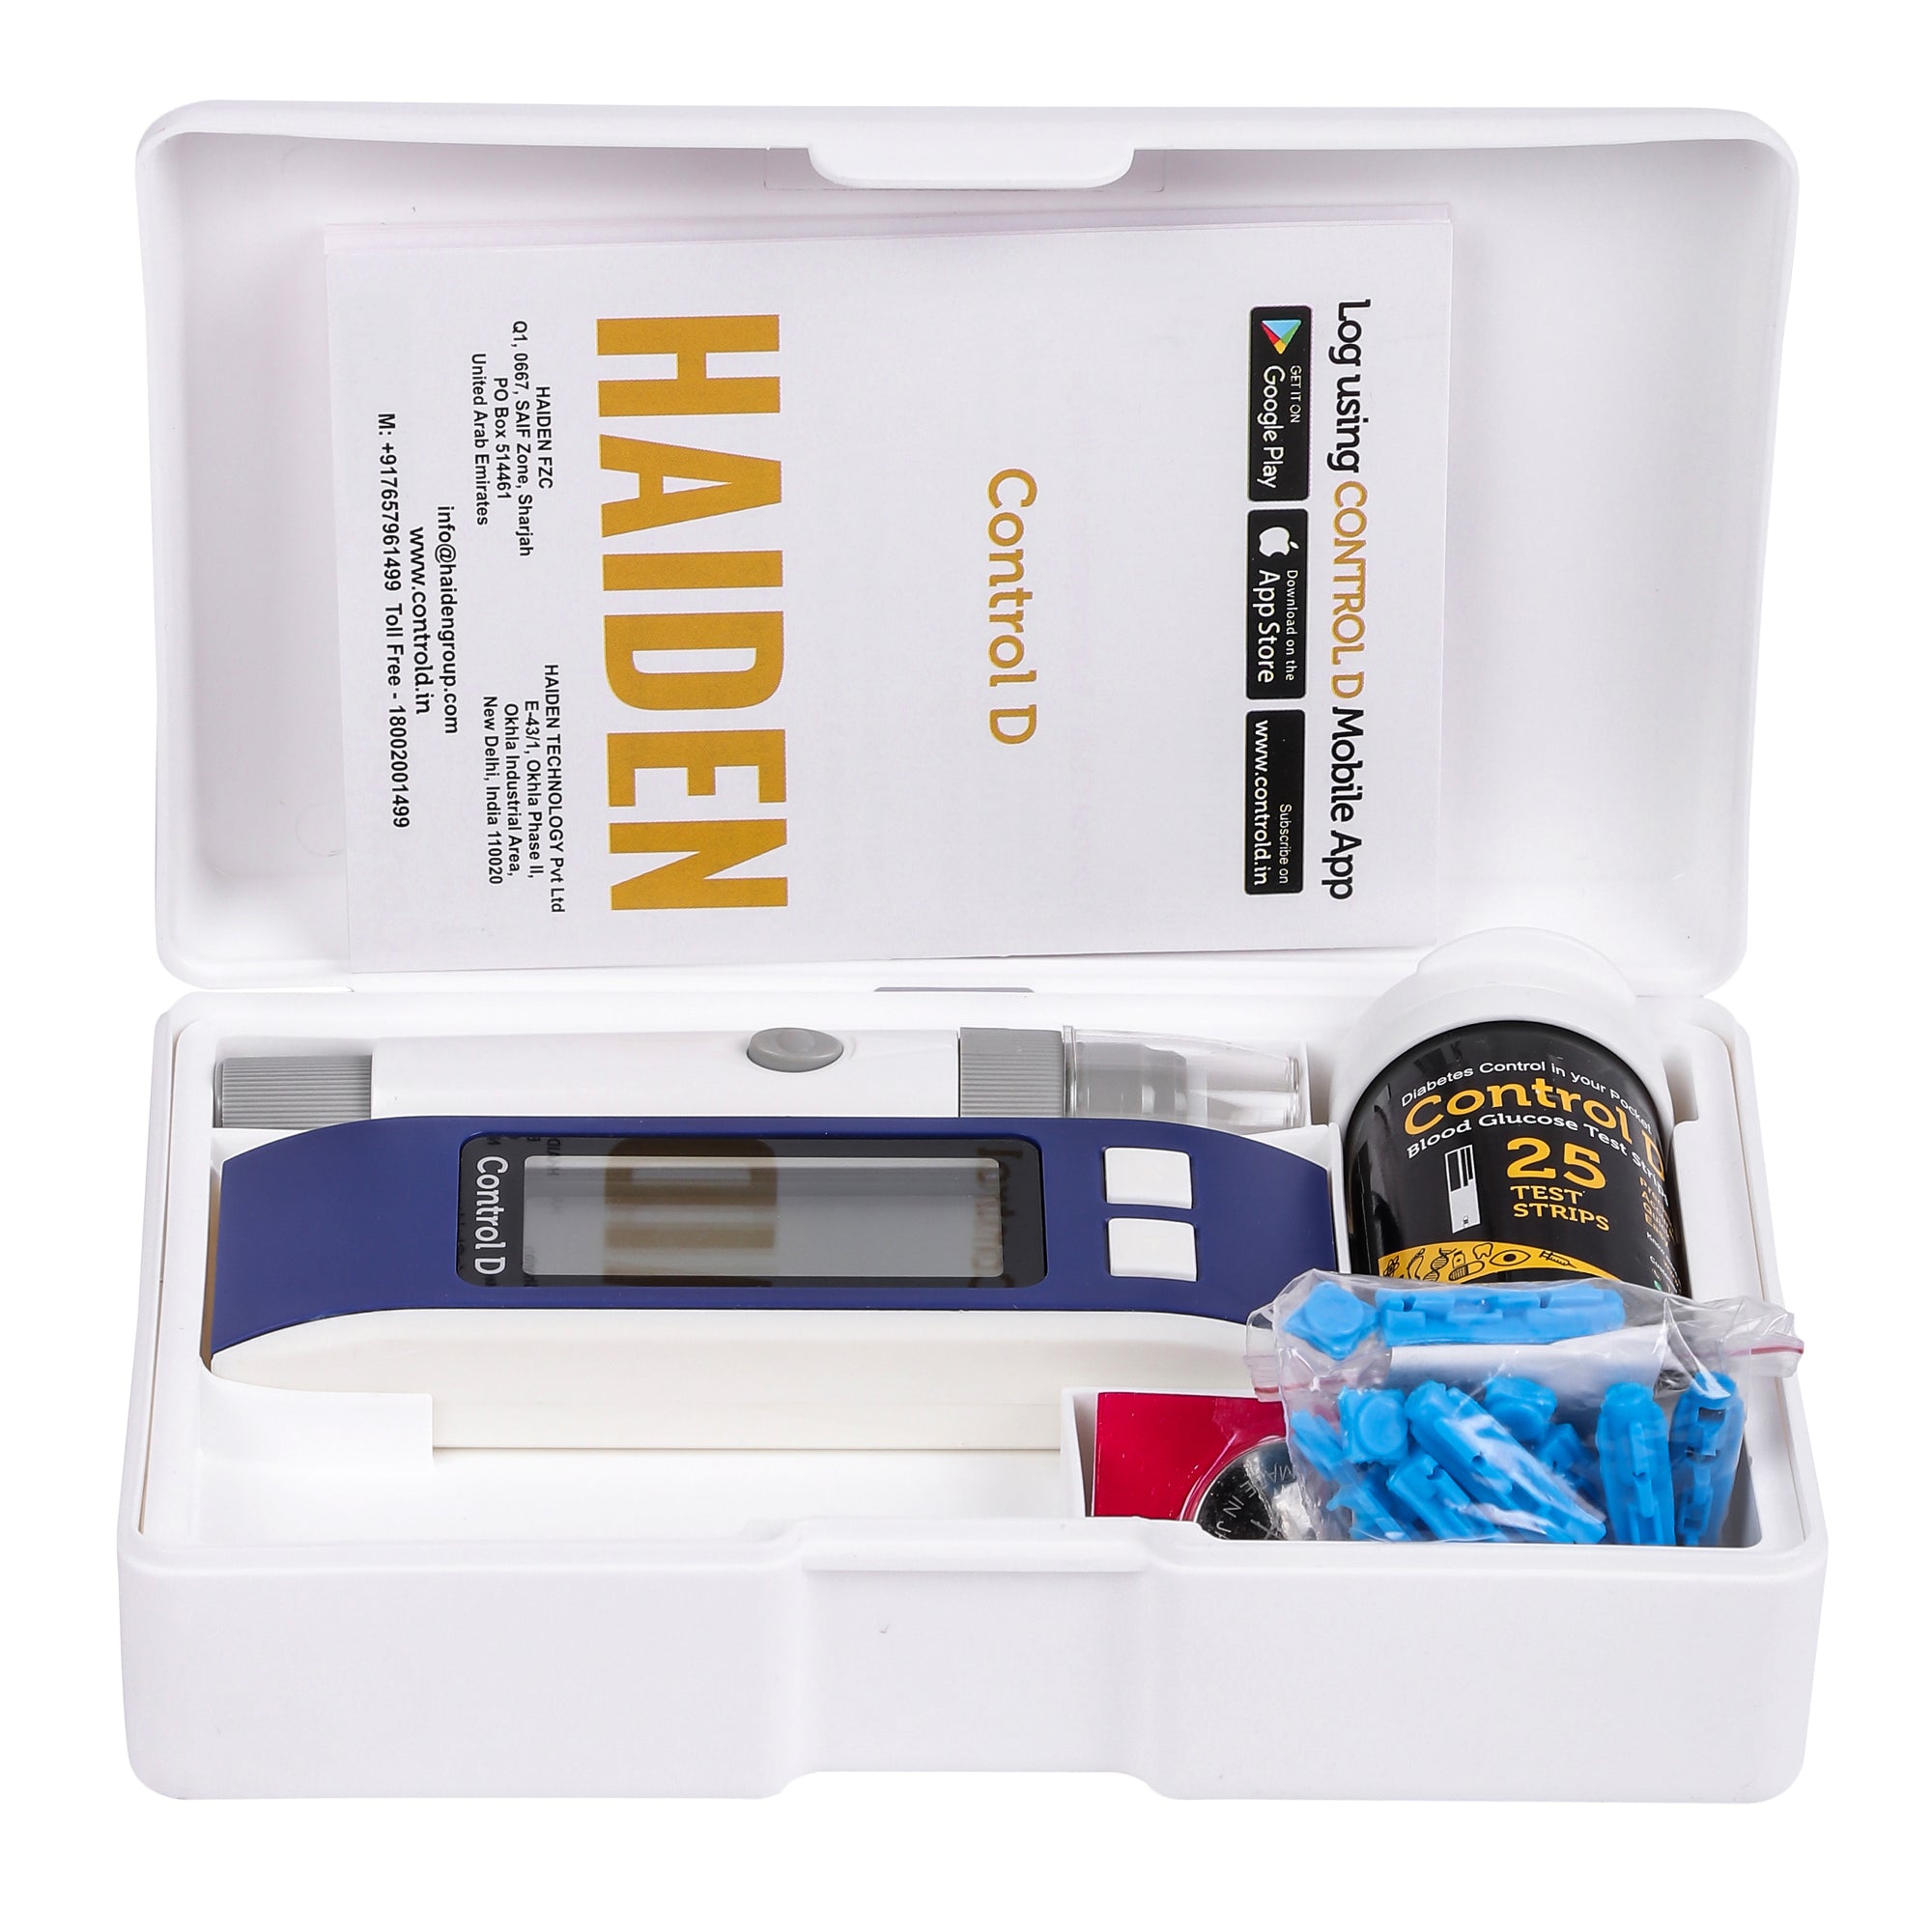 Control D Blue Meter Kit with 25 Strips